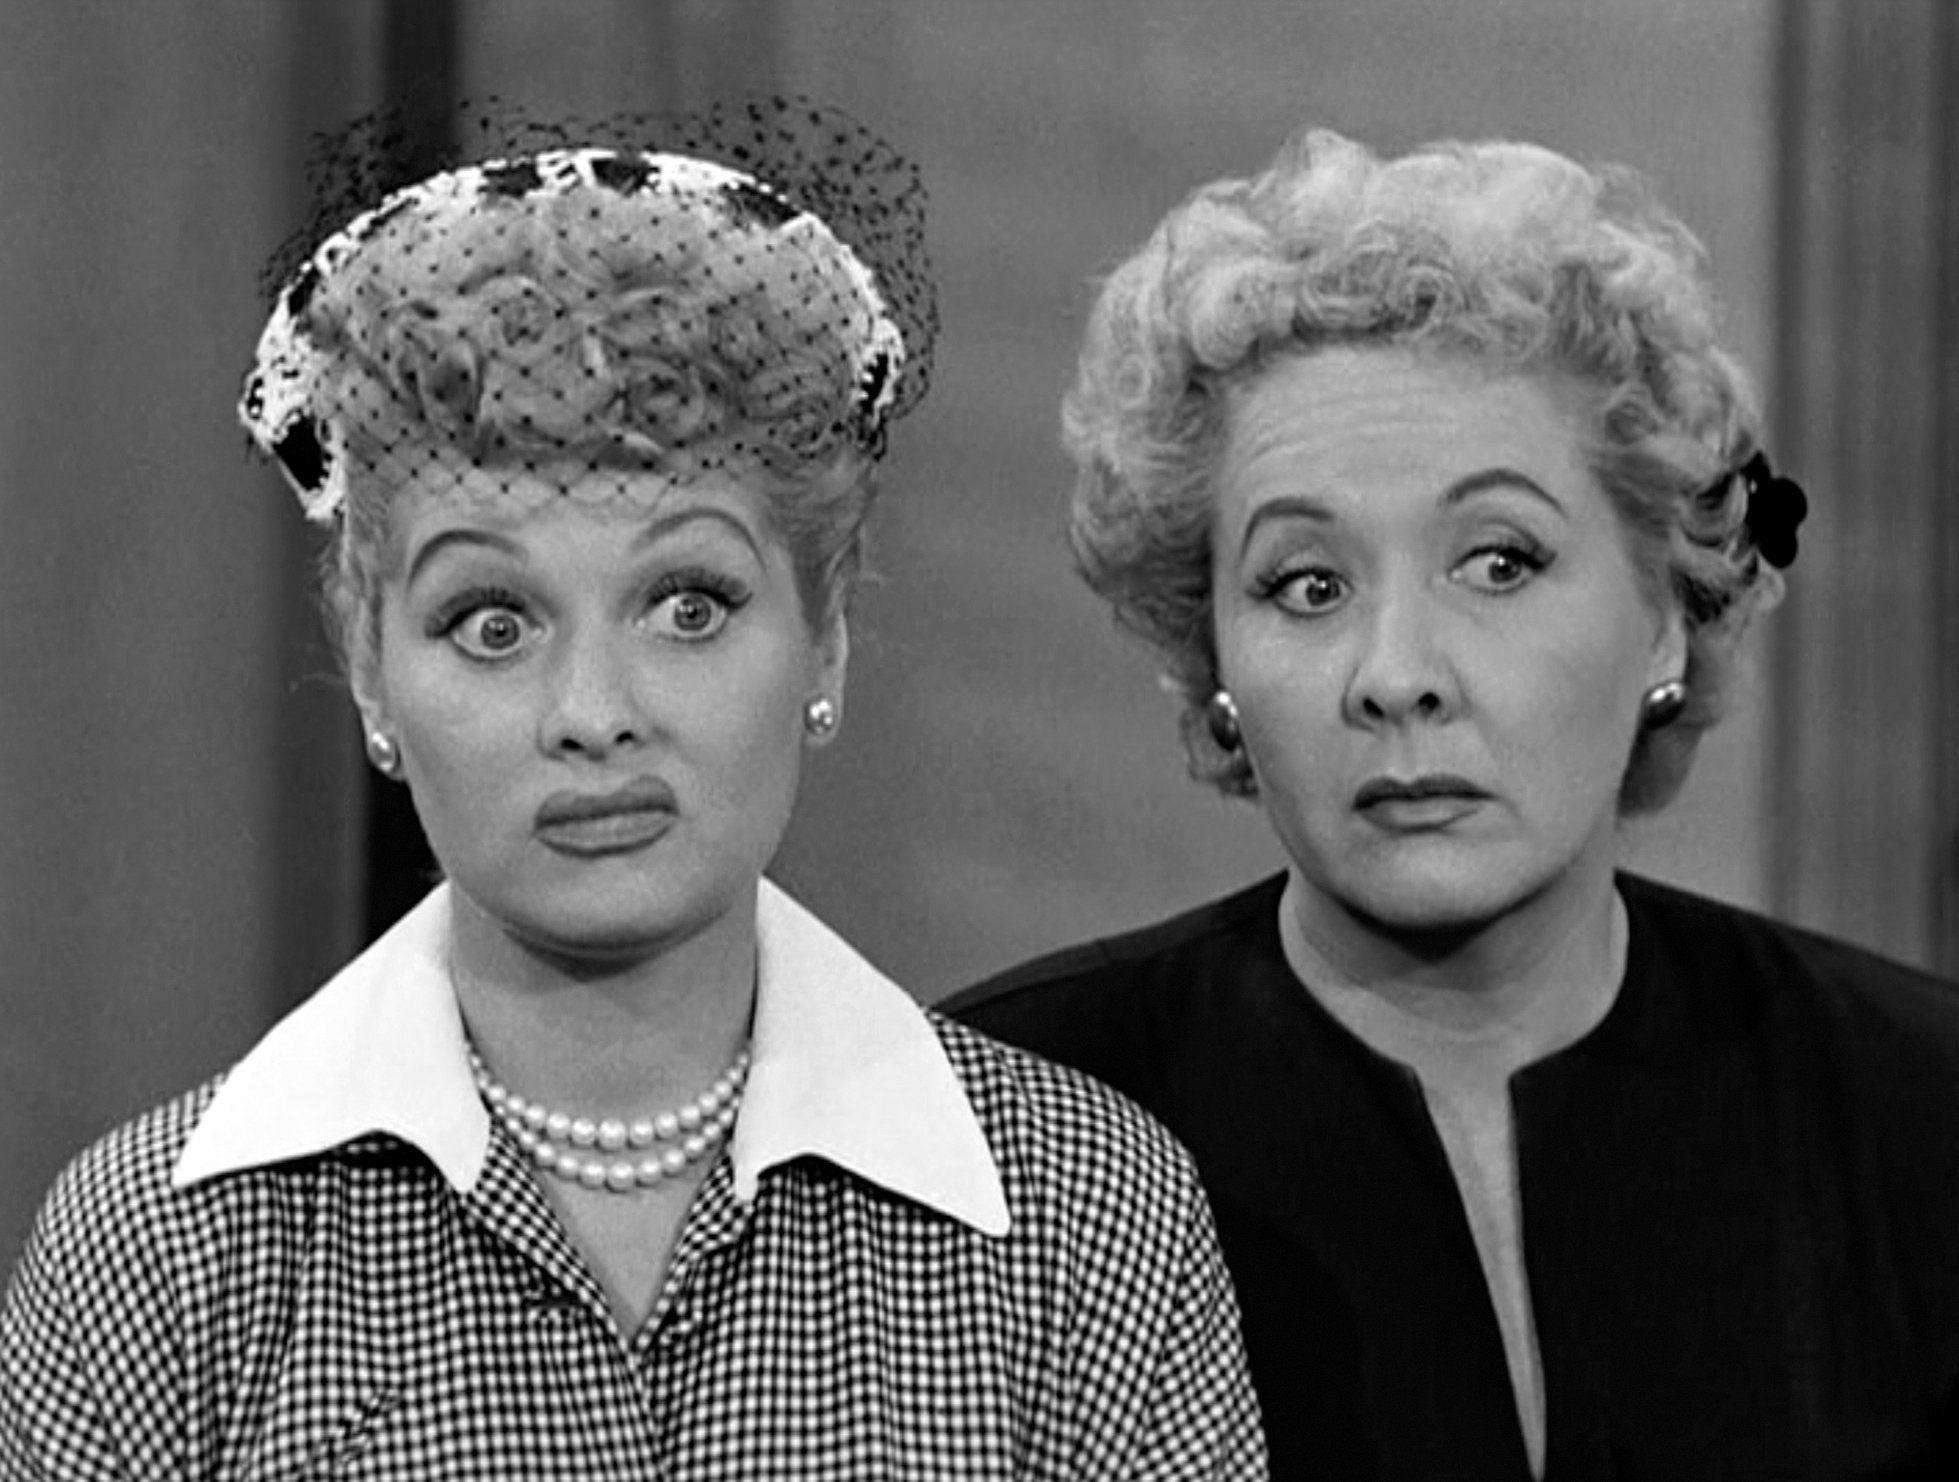 Lucille Ball and Vivian Vance in front of a wall in an episode of 'I Love Lucy'